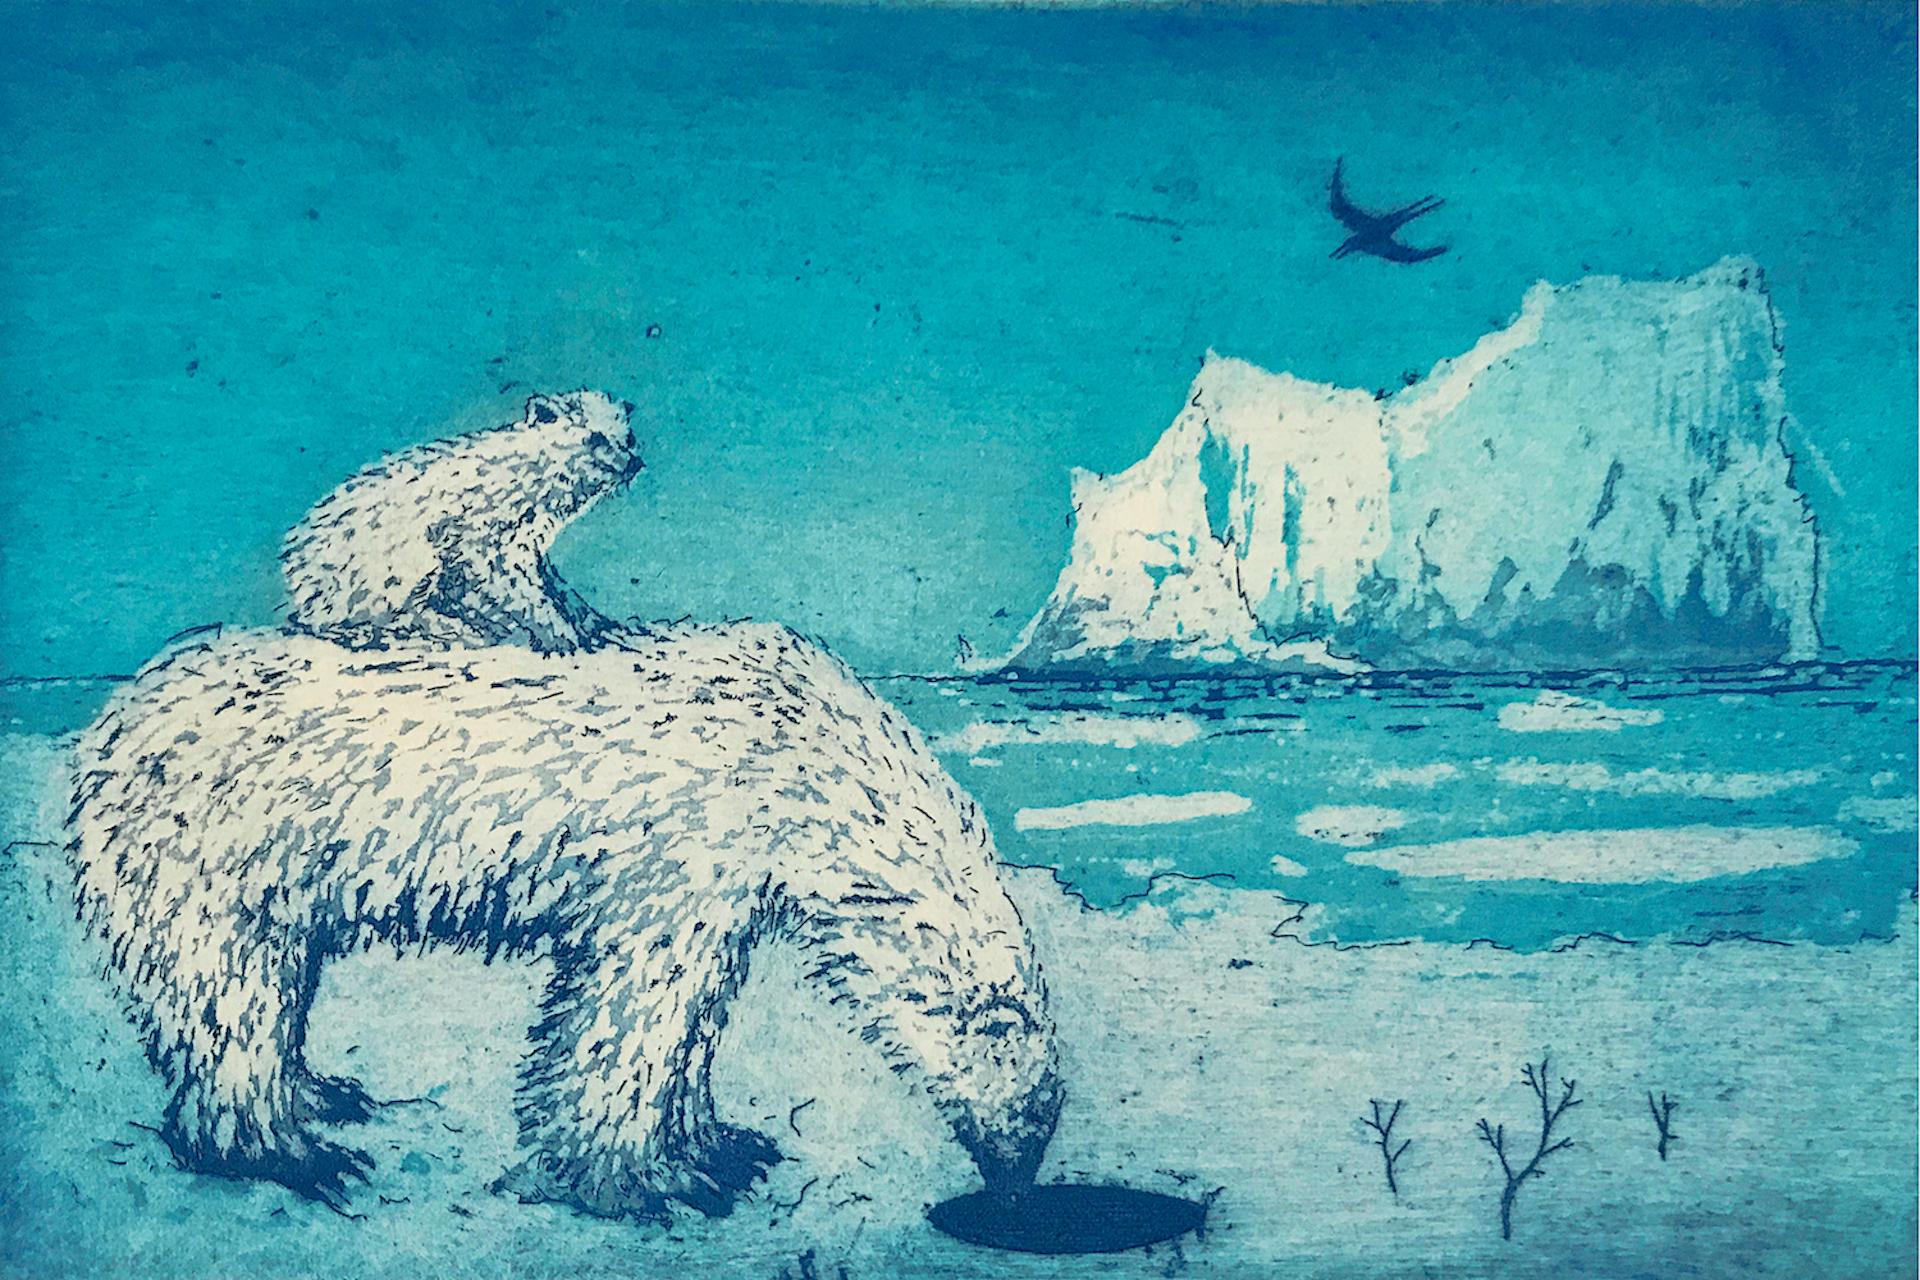 Tim Southall, « A Hole in the Ice », impression en édition limitée, art abordable